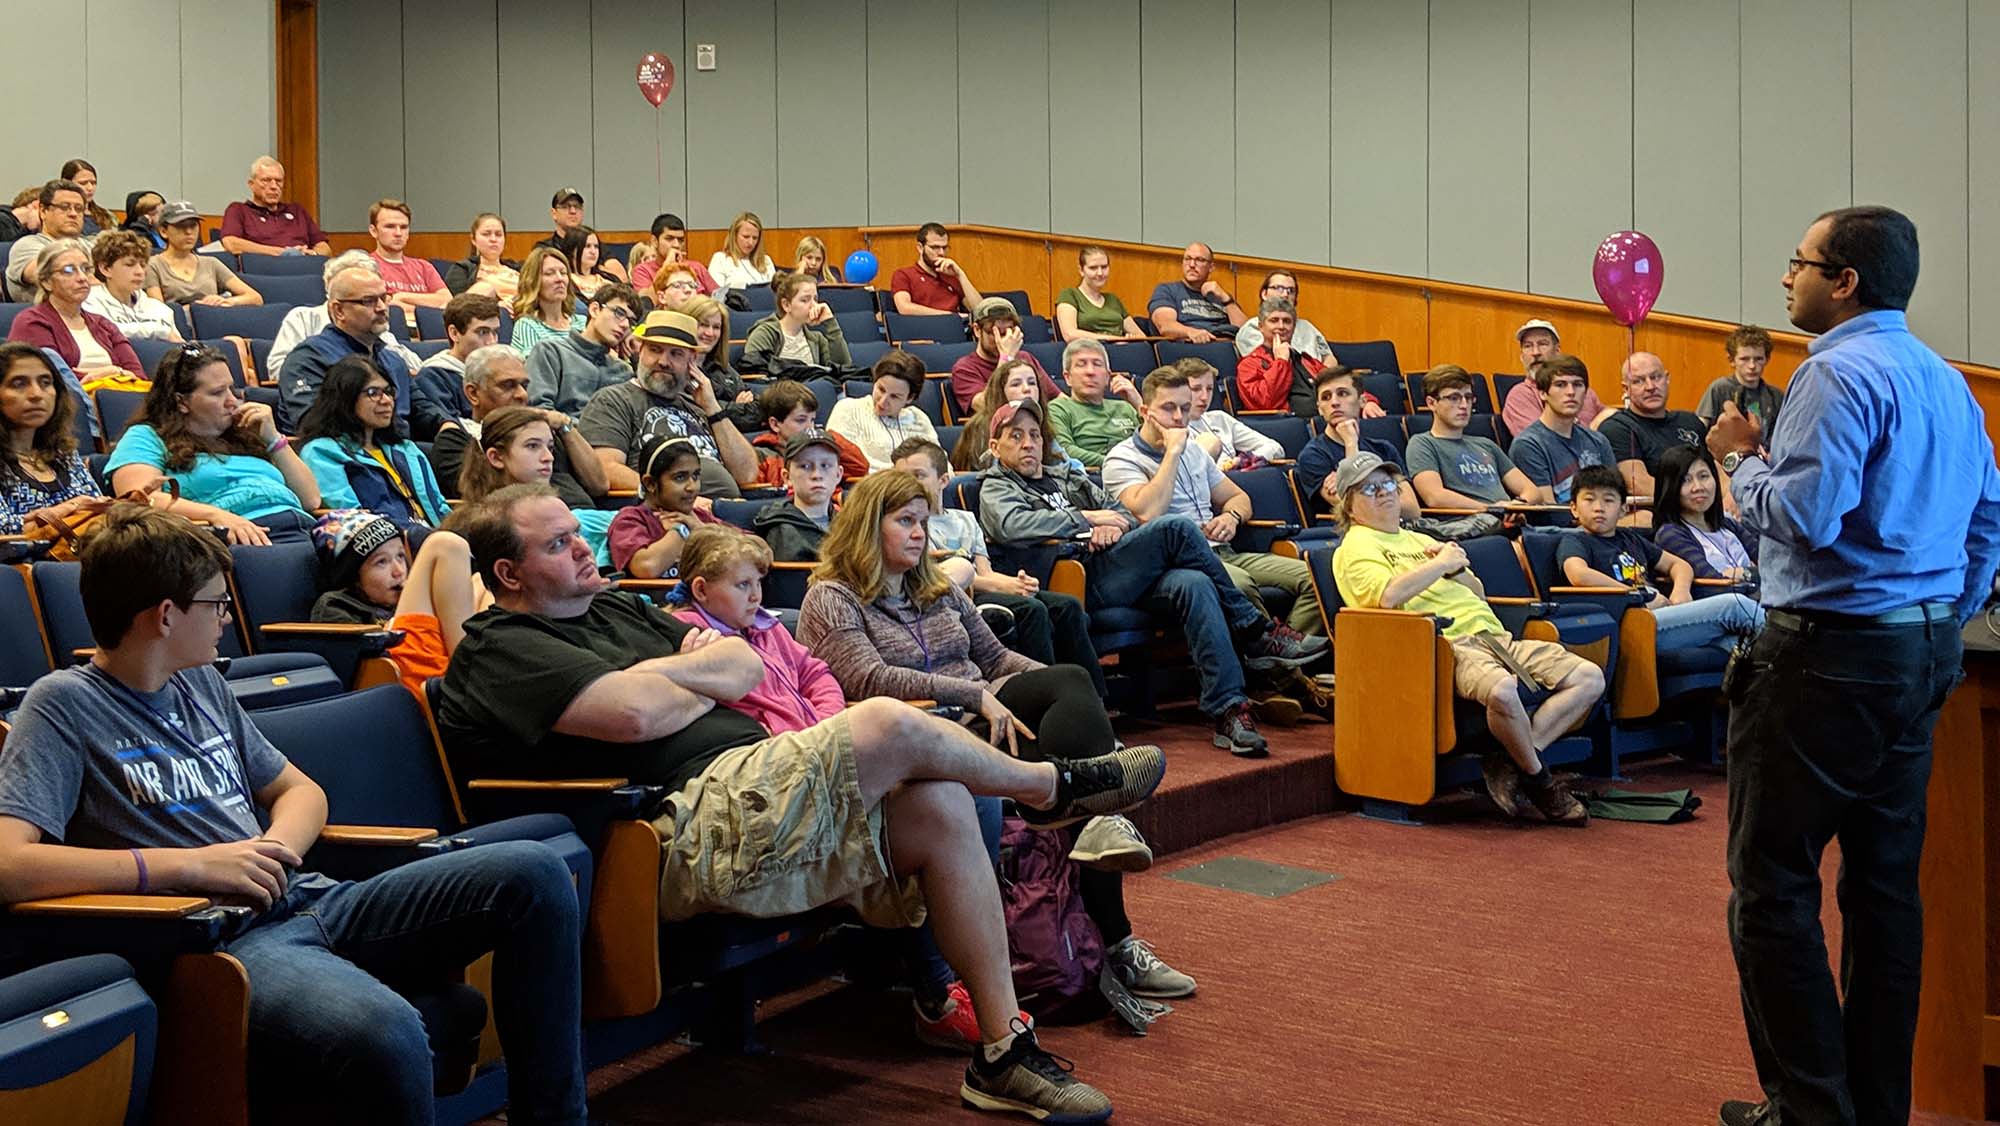 Prospective students and their parents listen to the professor's presentation in a lecture hall on campus.